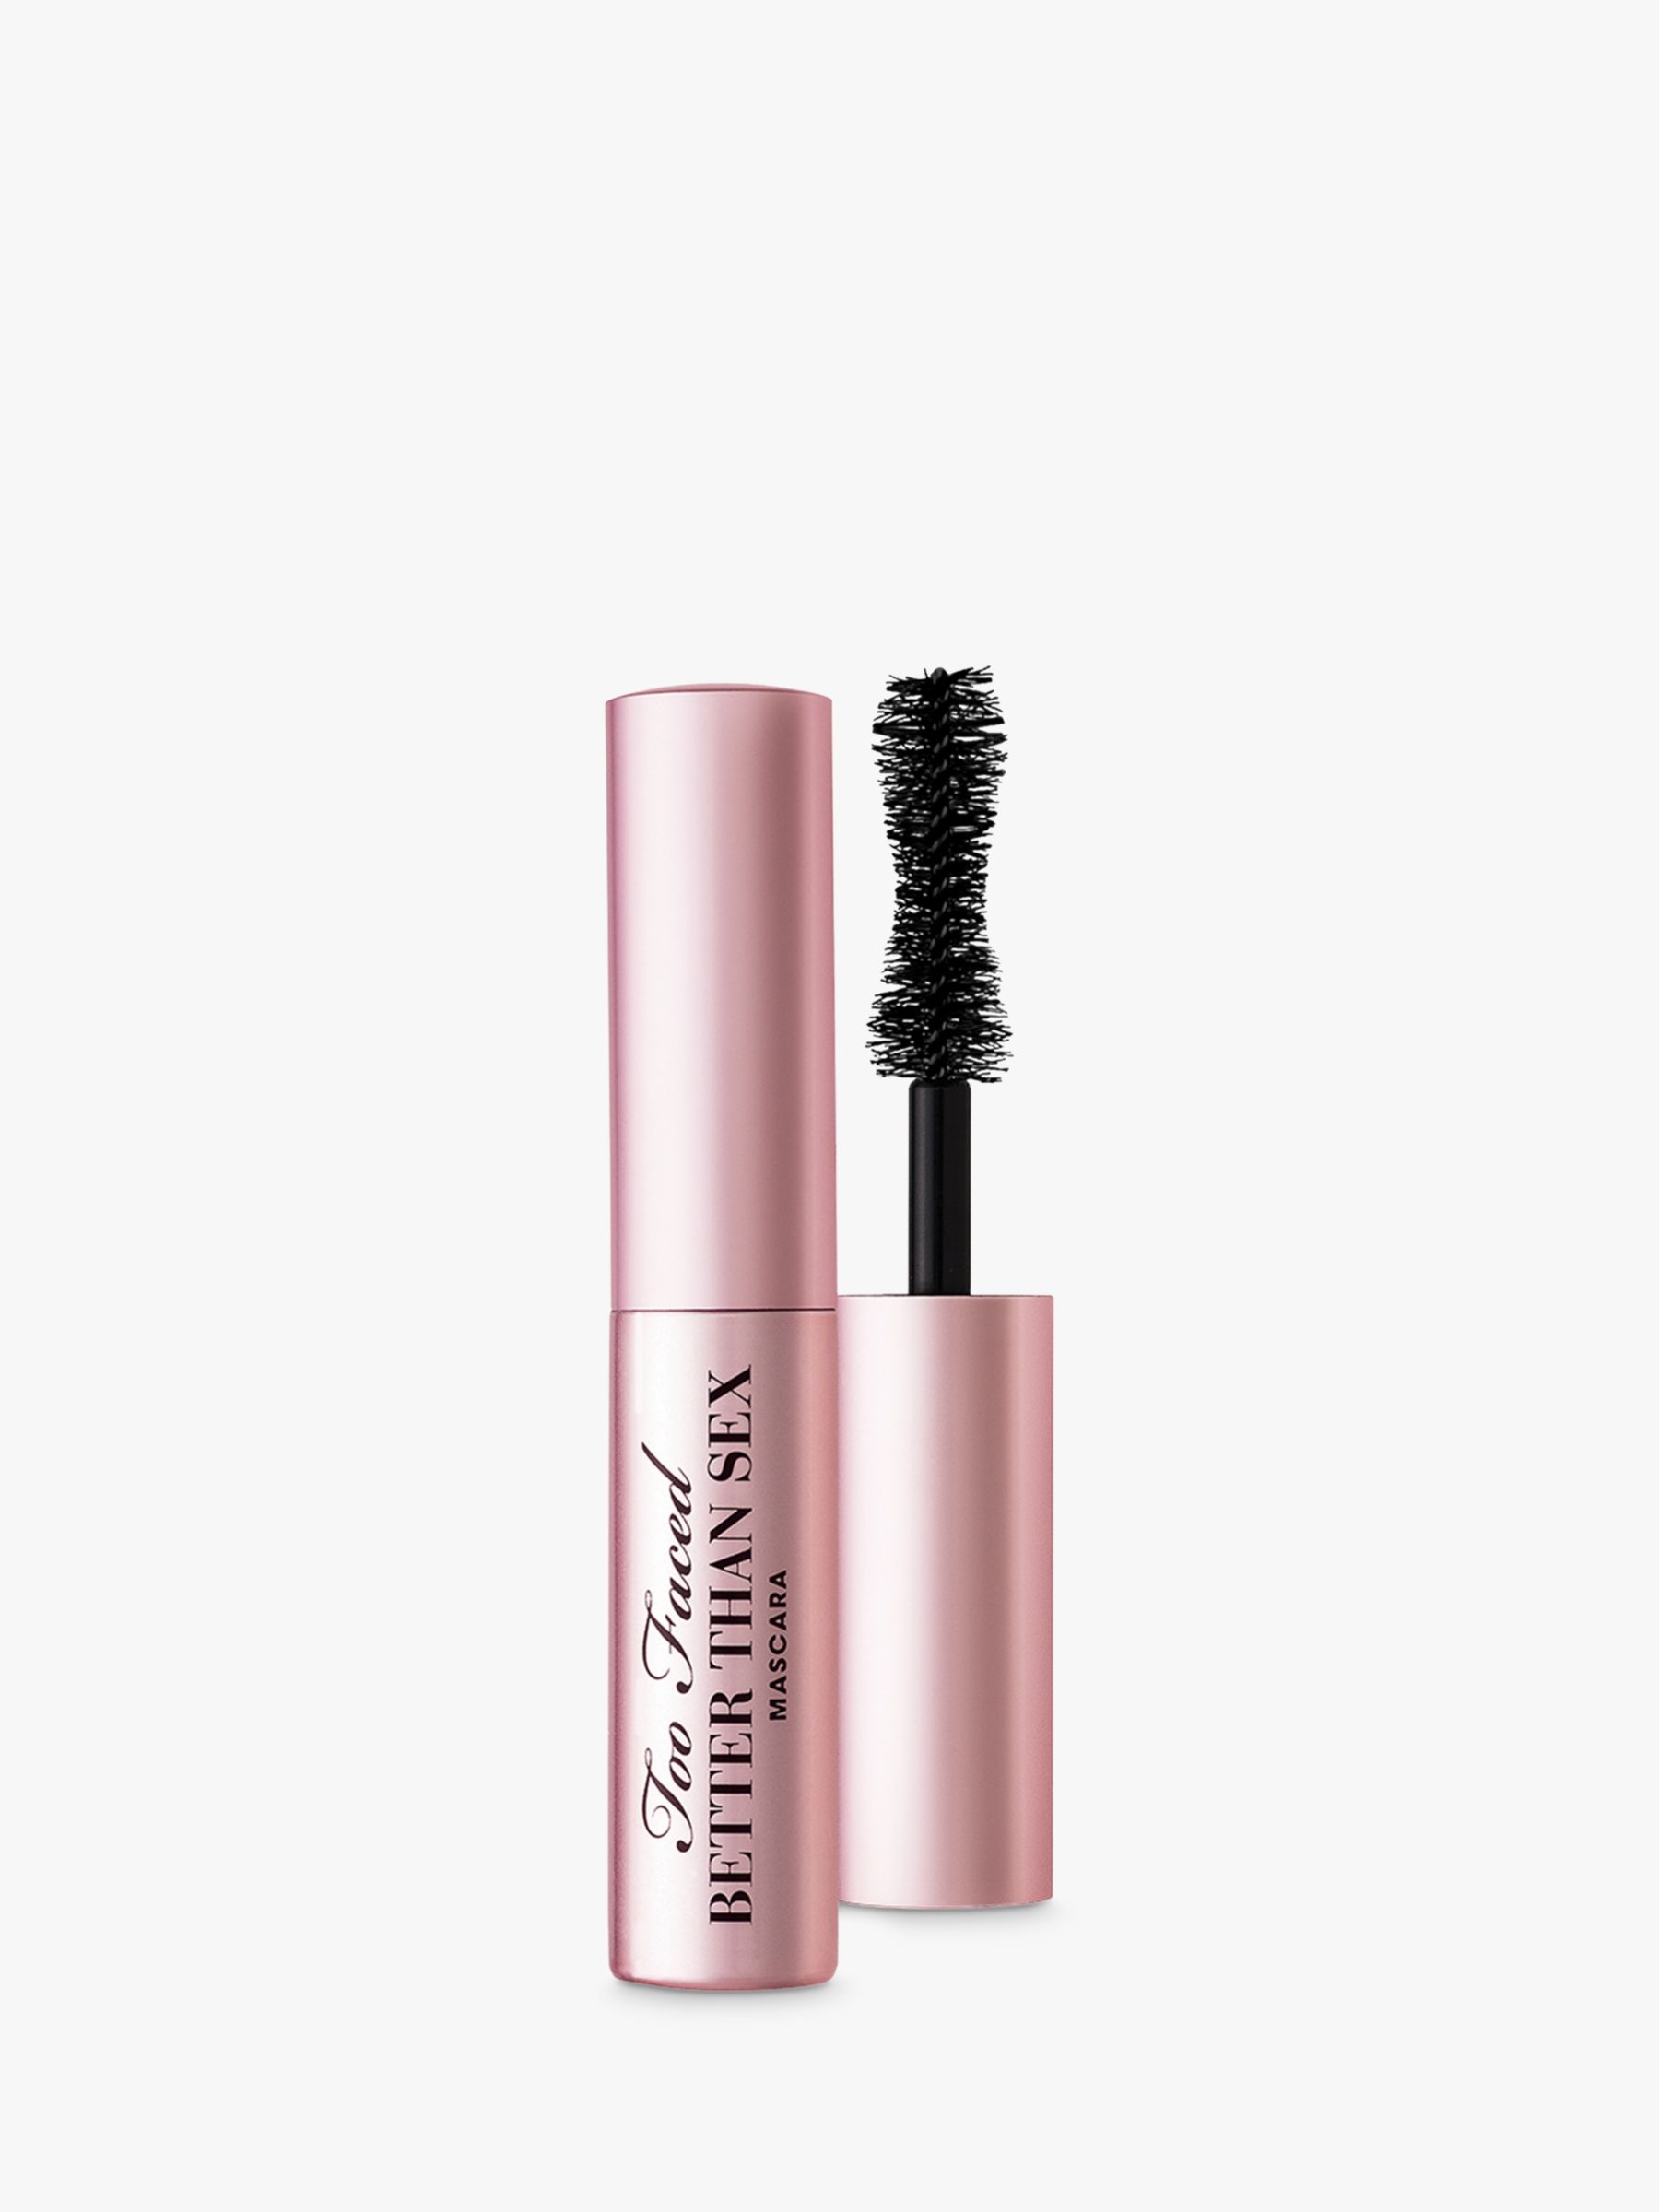 Too Faced Better Than Sex Mascara Black 48ml At John Lewis And Partners 6427